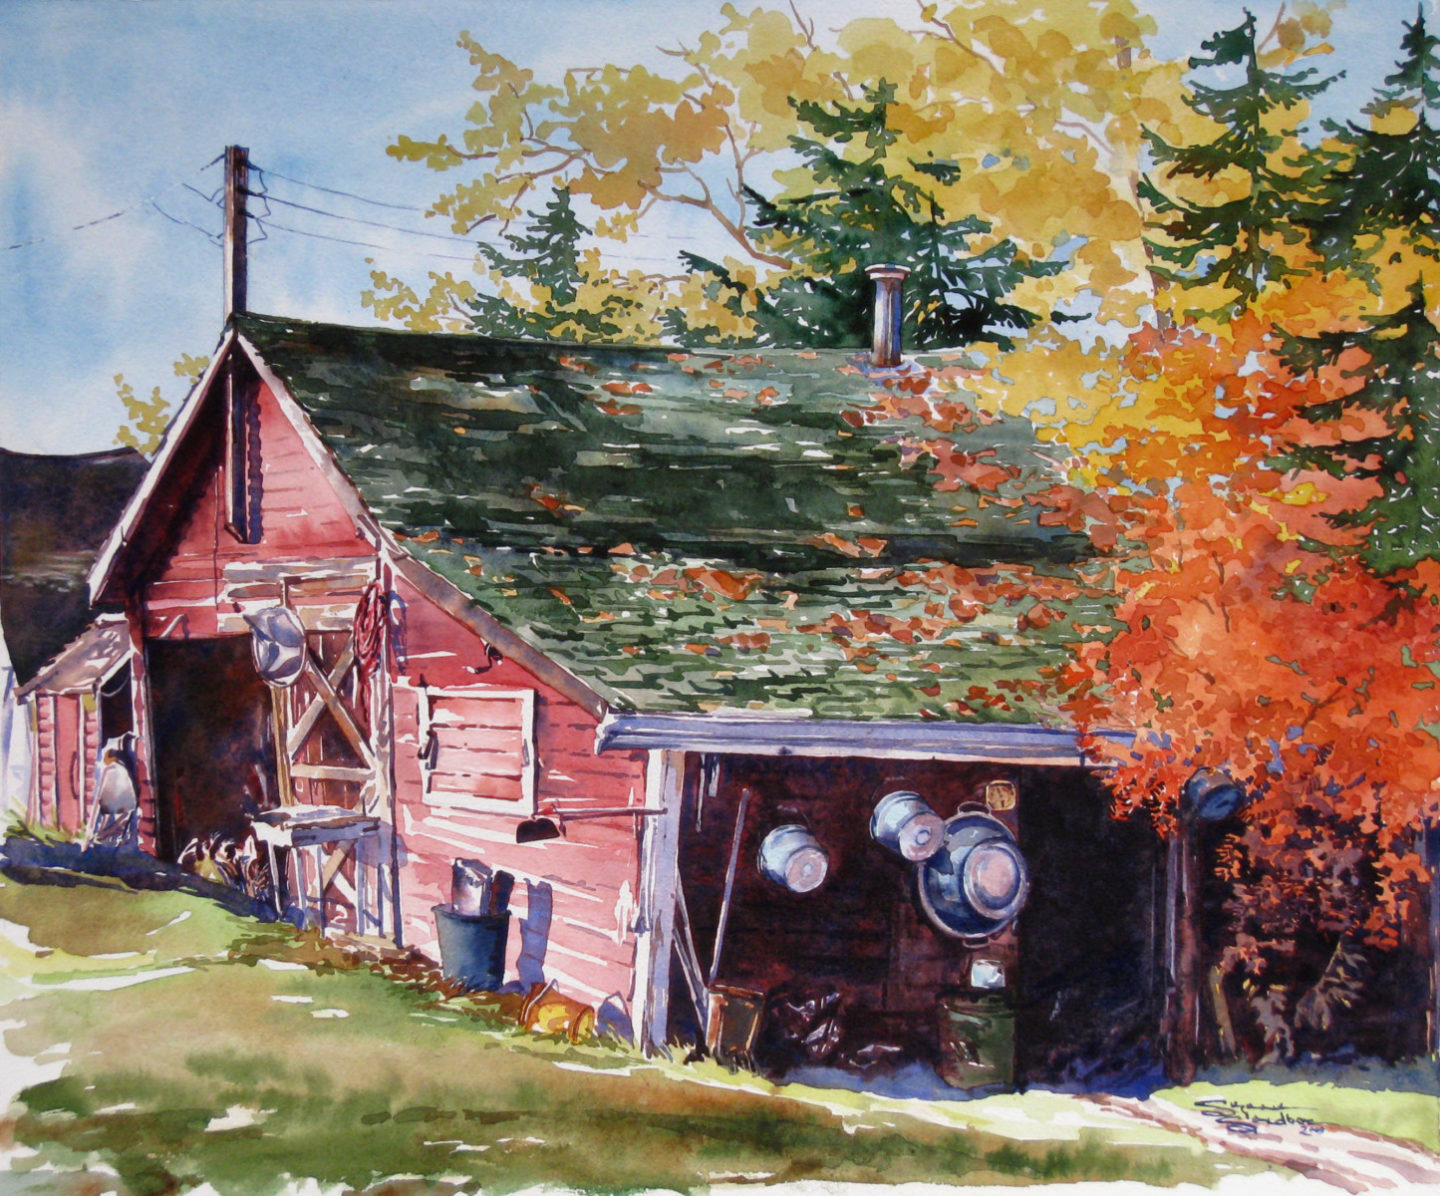 George's Place, 14 x 20, Watercolor, 2009 - 